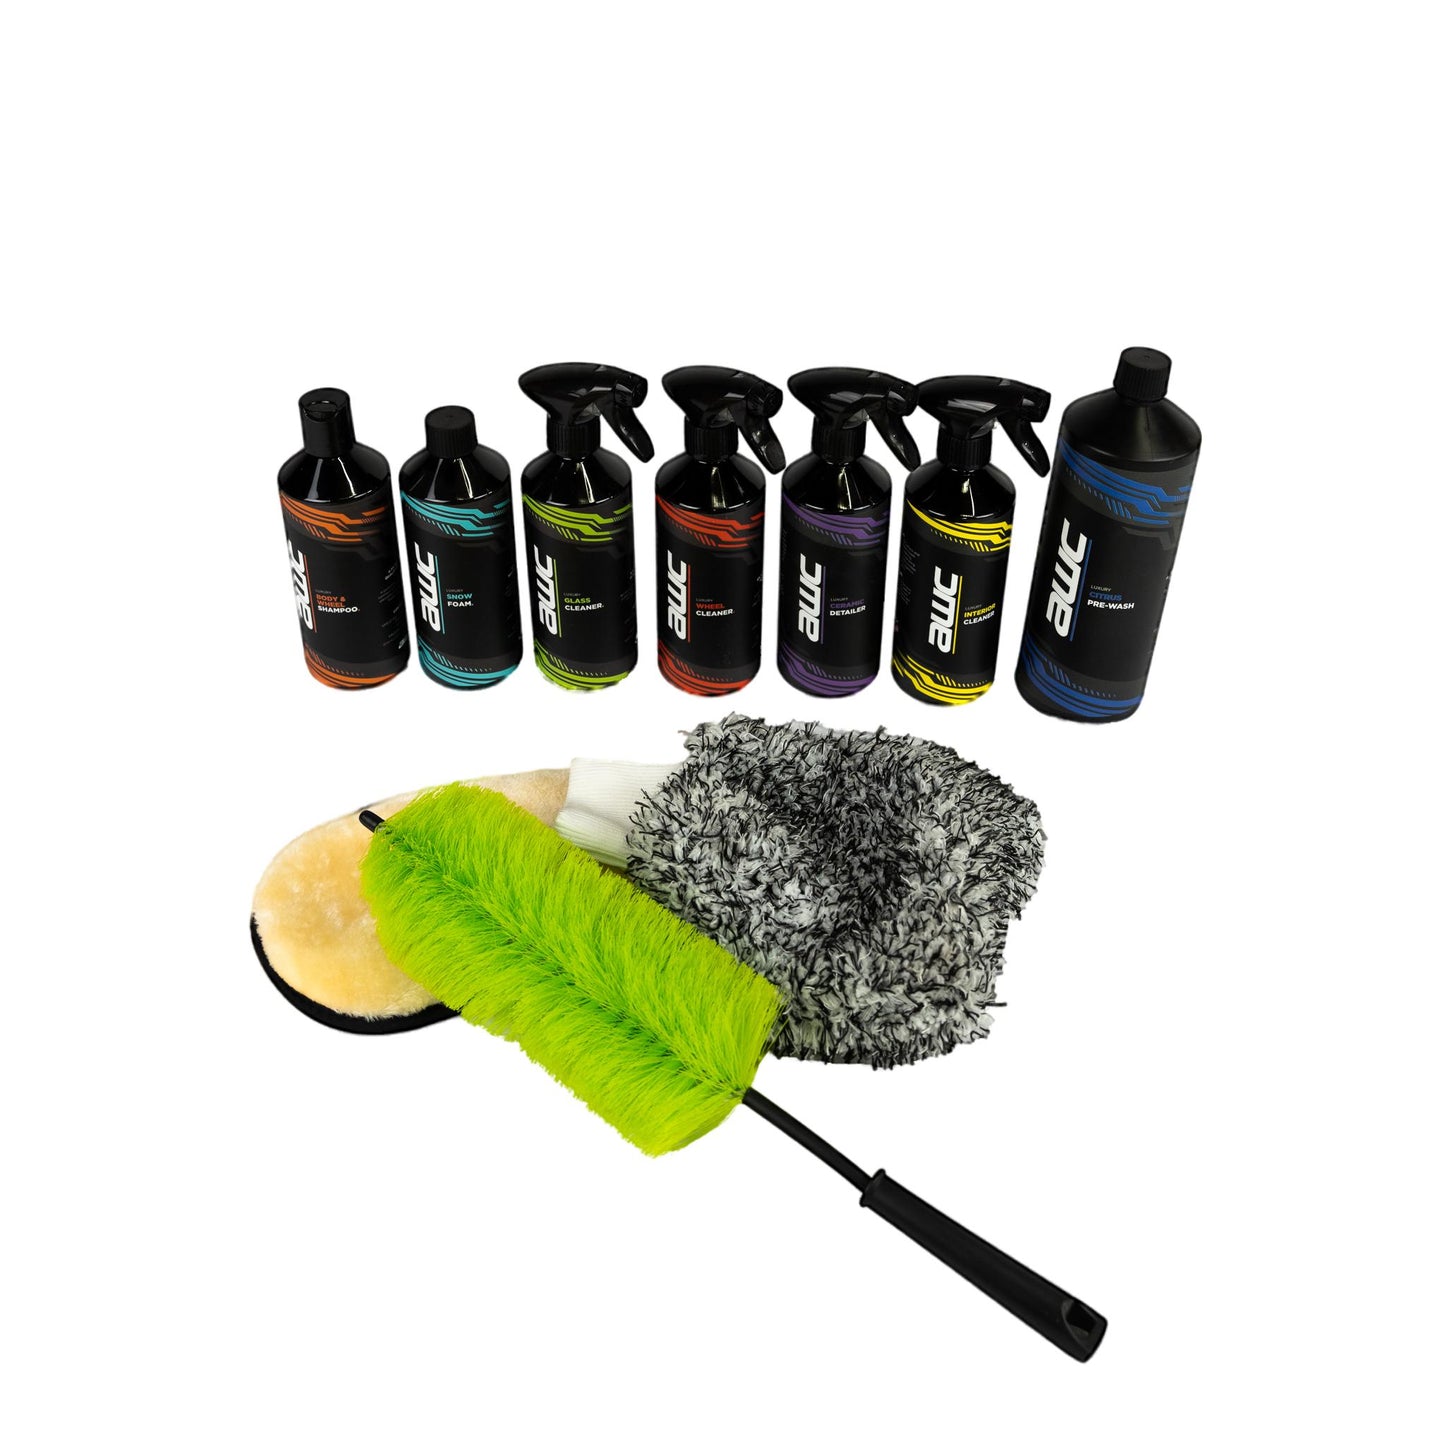 The Full Car Cleaning Bundle